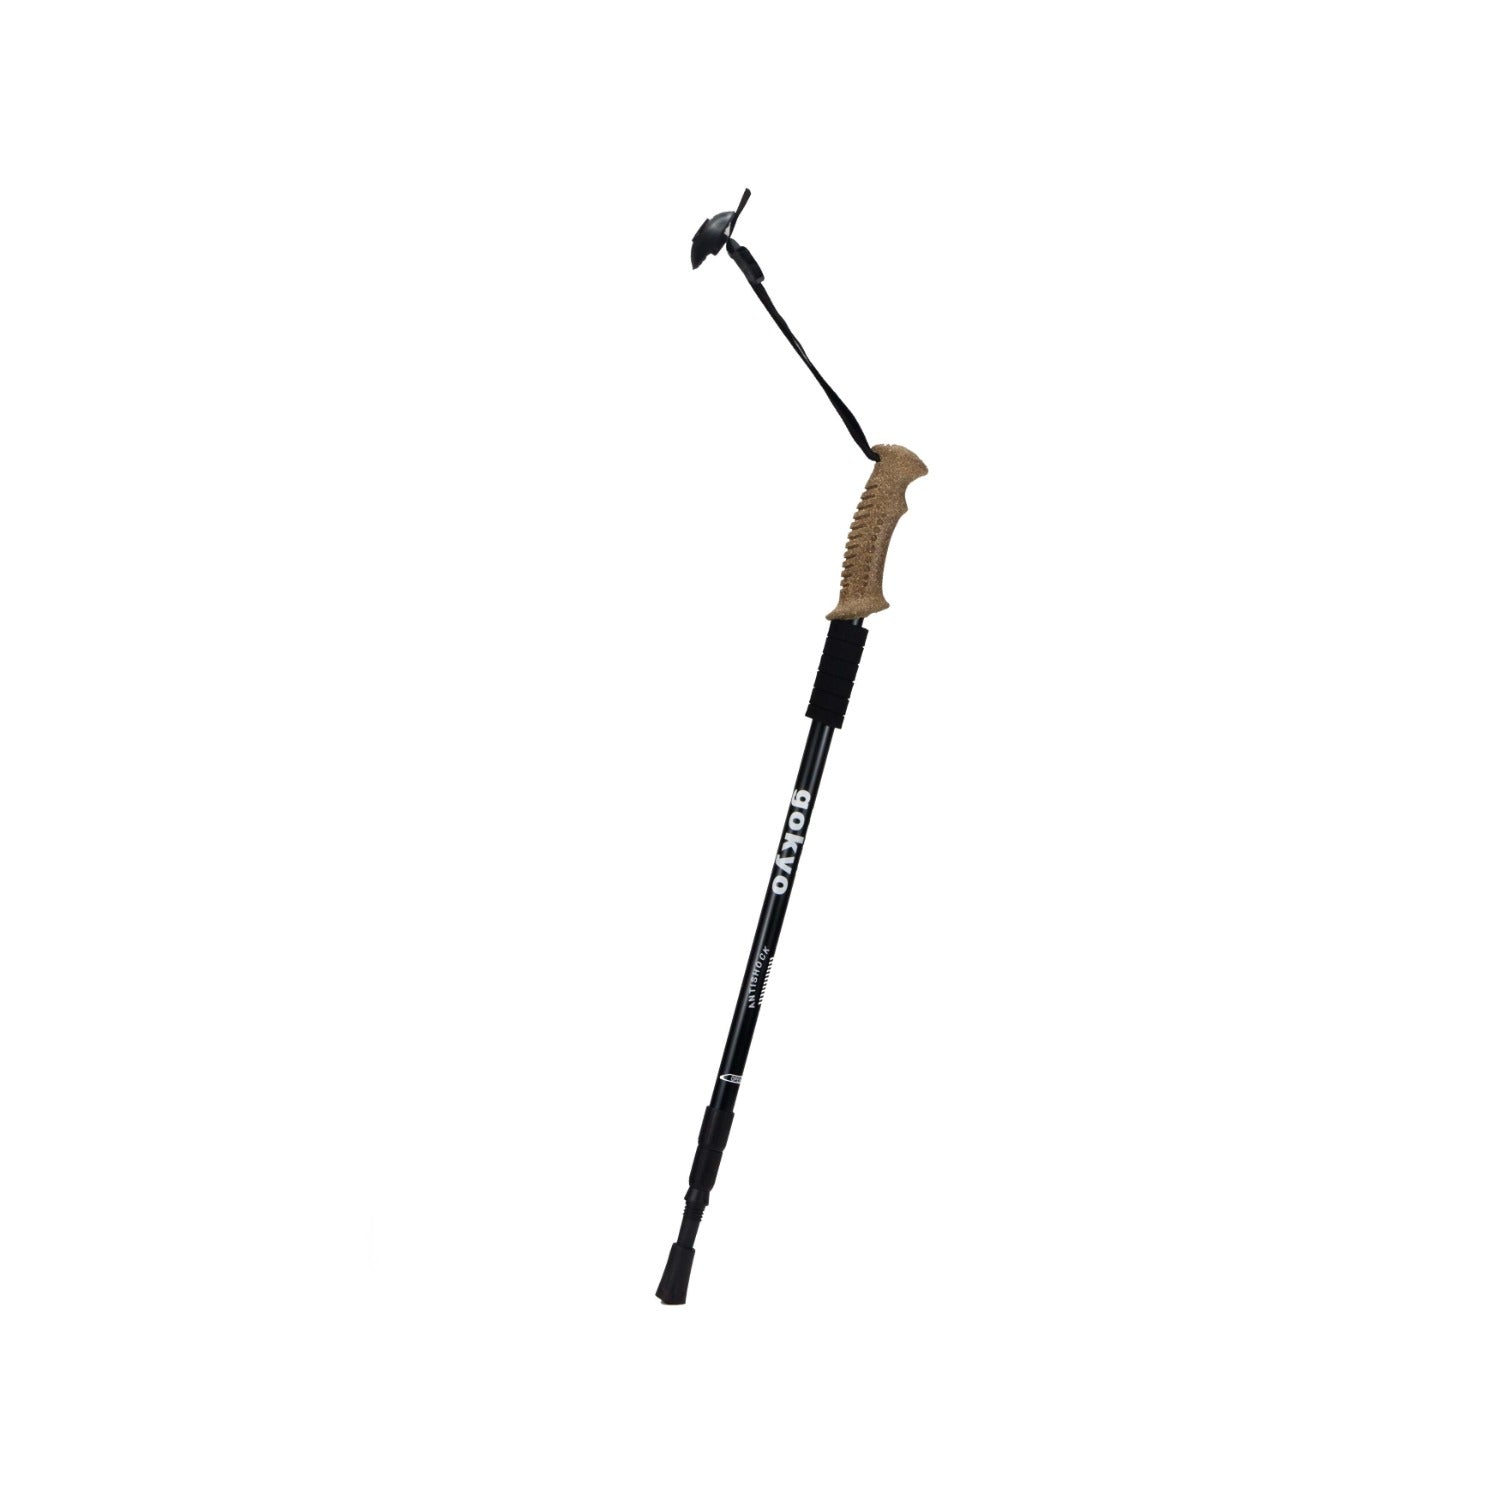 Buy Kaza Collapsible Trekking Pole Silver at Gokyo Outdoor Clothing & Gear